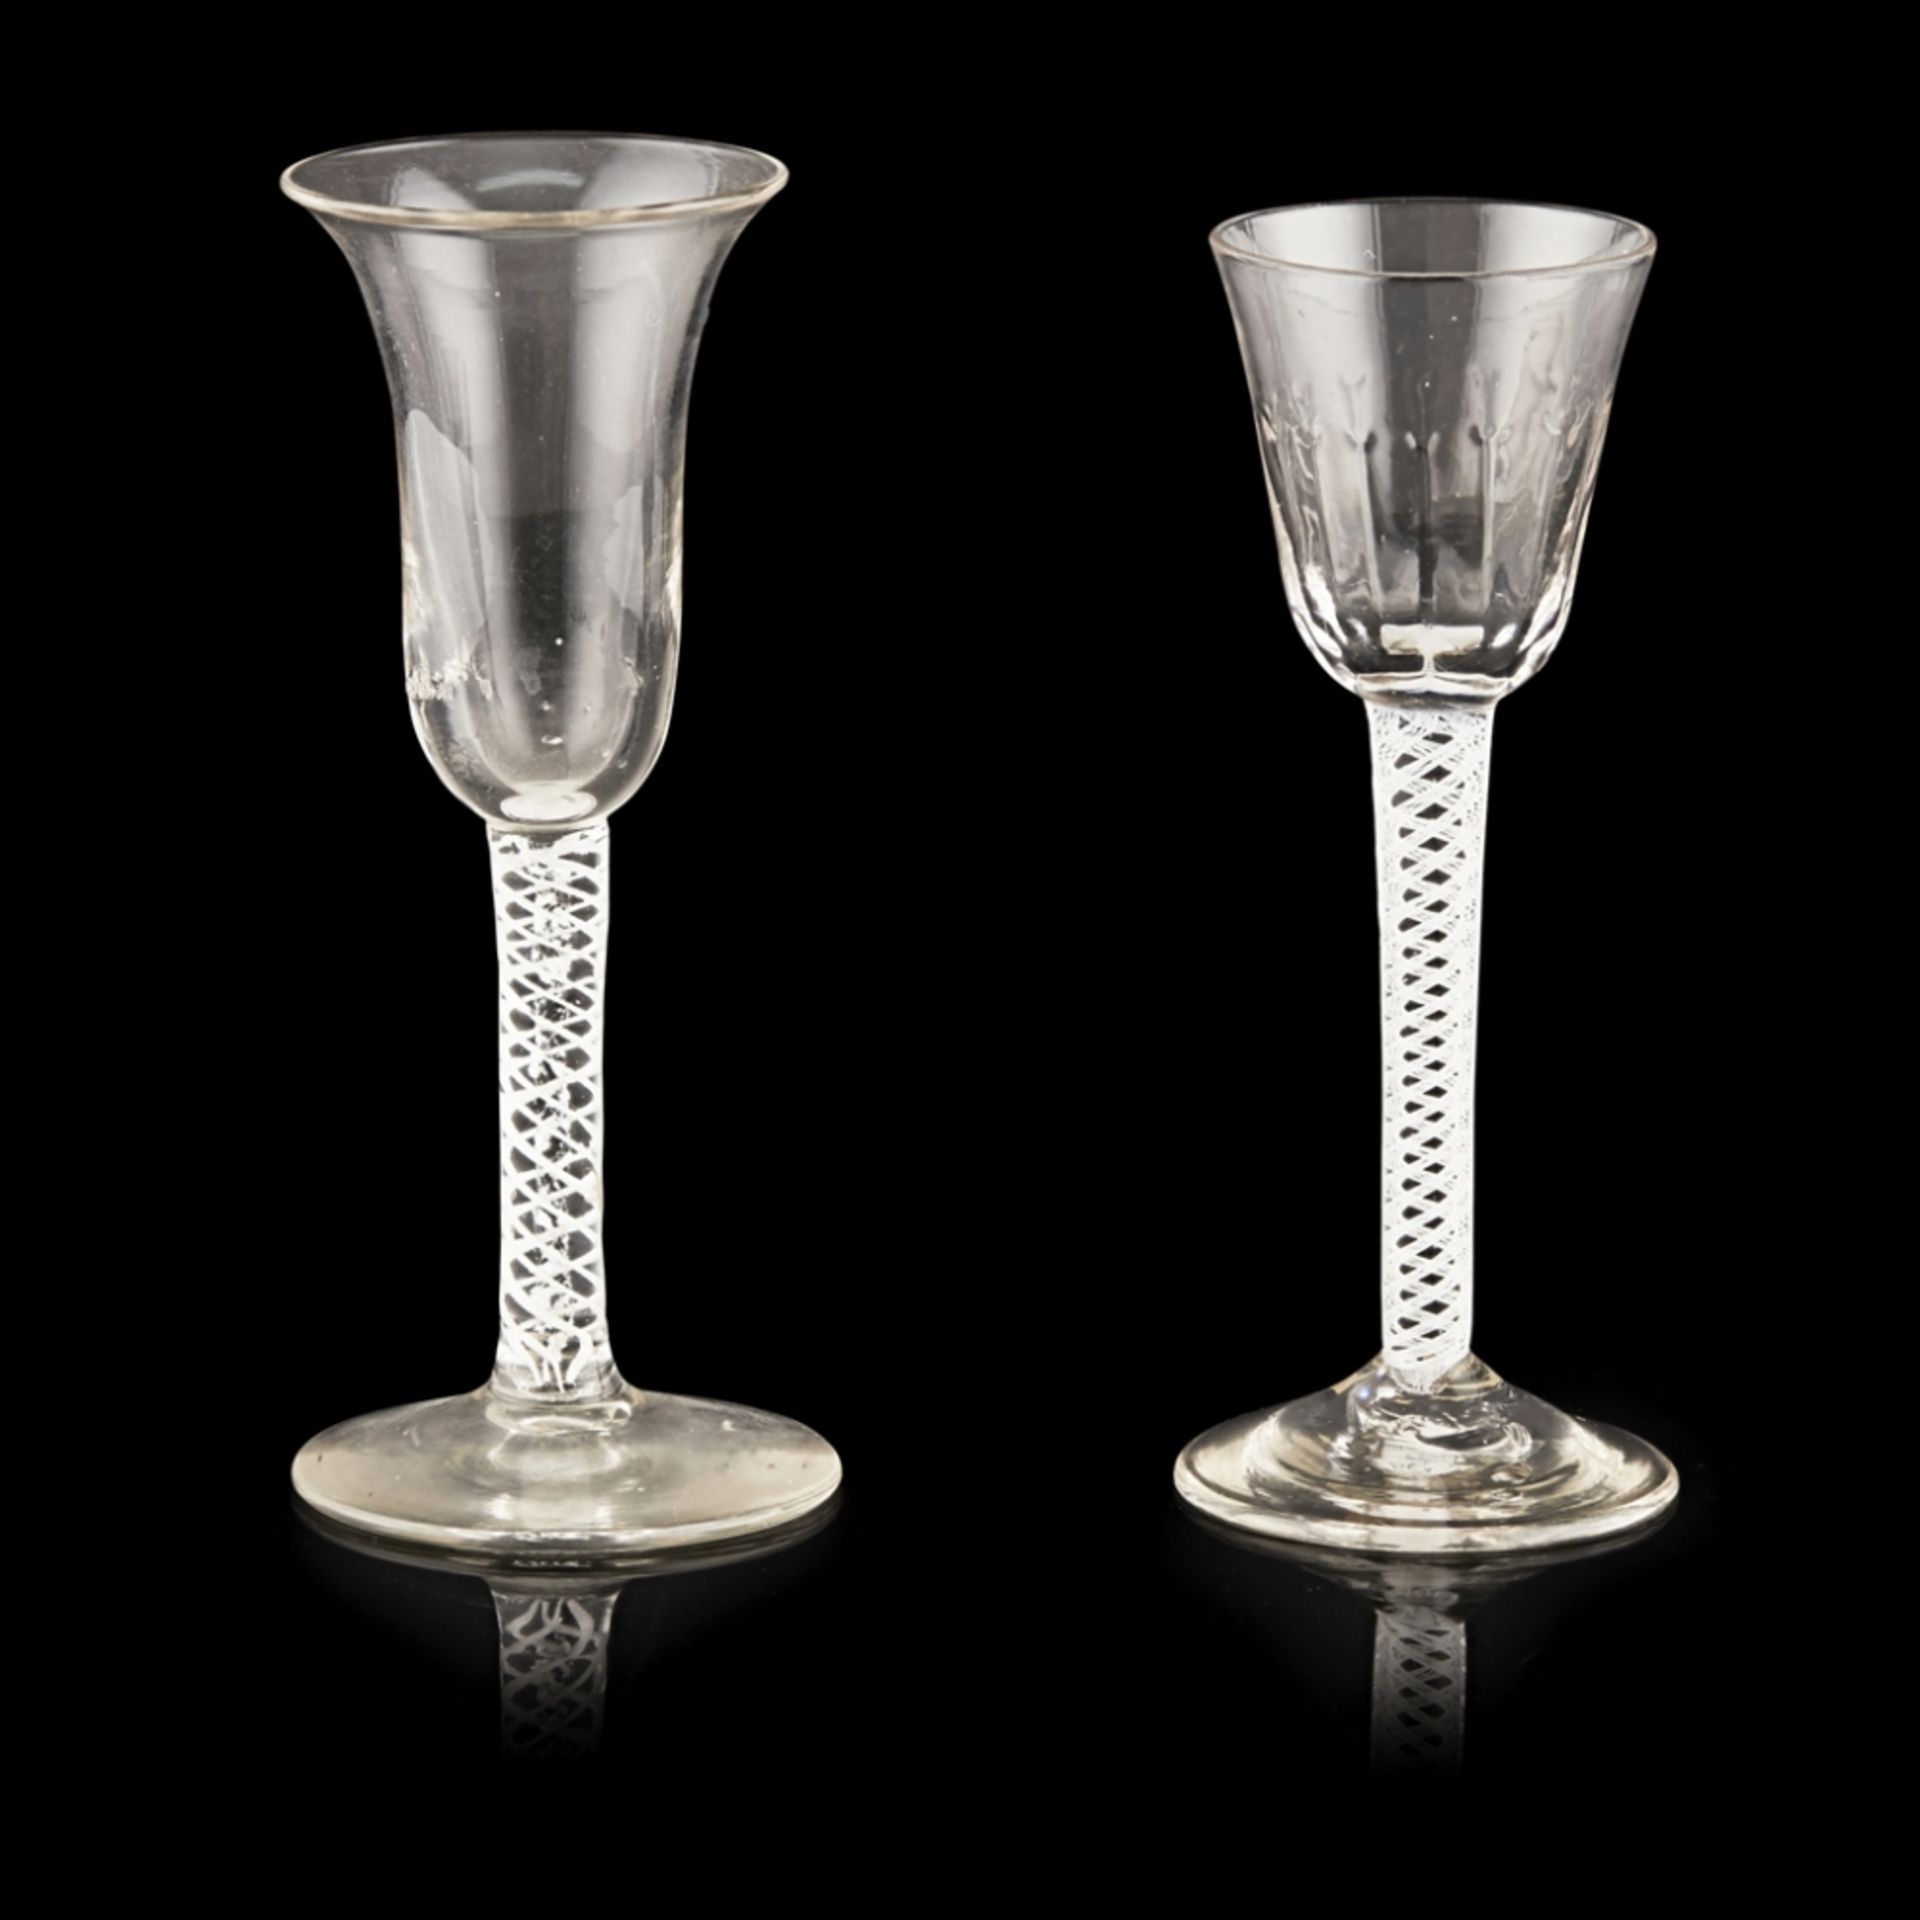 FOUR GEORGIAN TWIST STEM WINE GLASSESMID-18TH CENTURY comprising a bell bowled glass with a mixed - Image 2 of 3